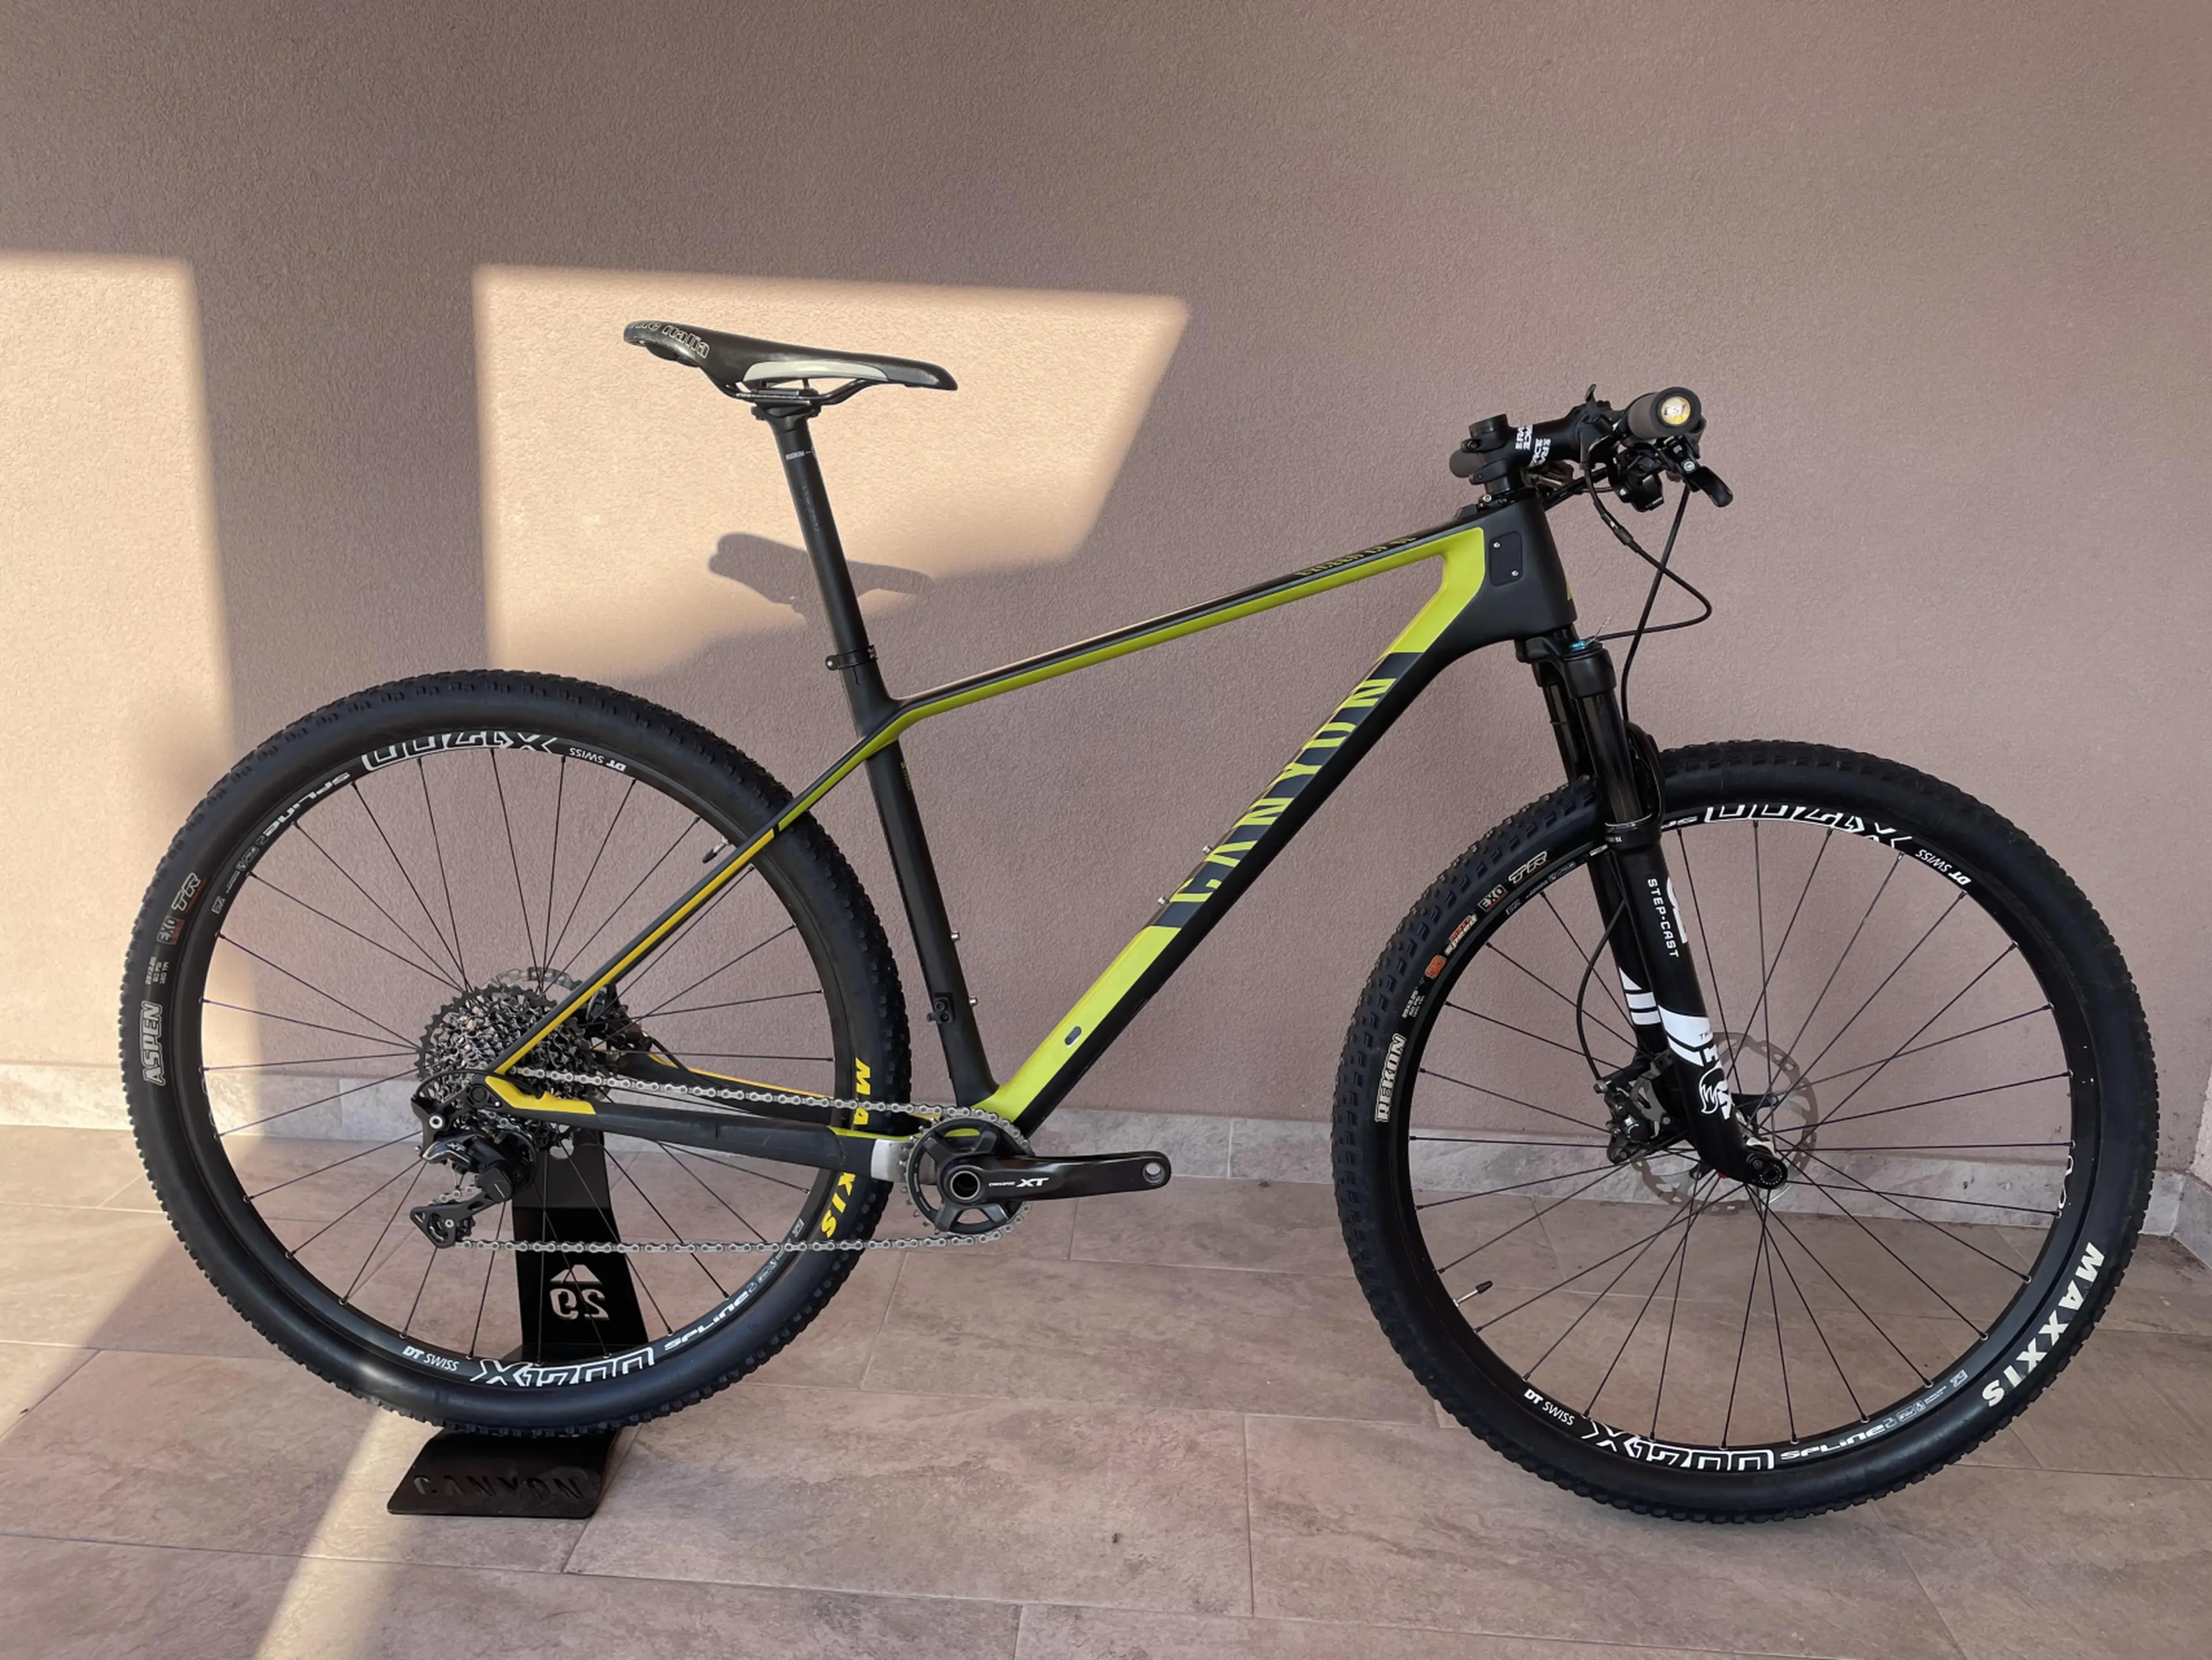 Image MTB carbon hardtail 29 Canyon Exceed CF SL 6.9, FOX 32 SC, FACTURA